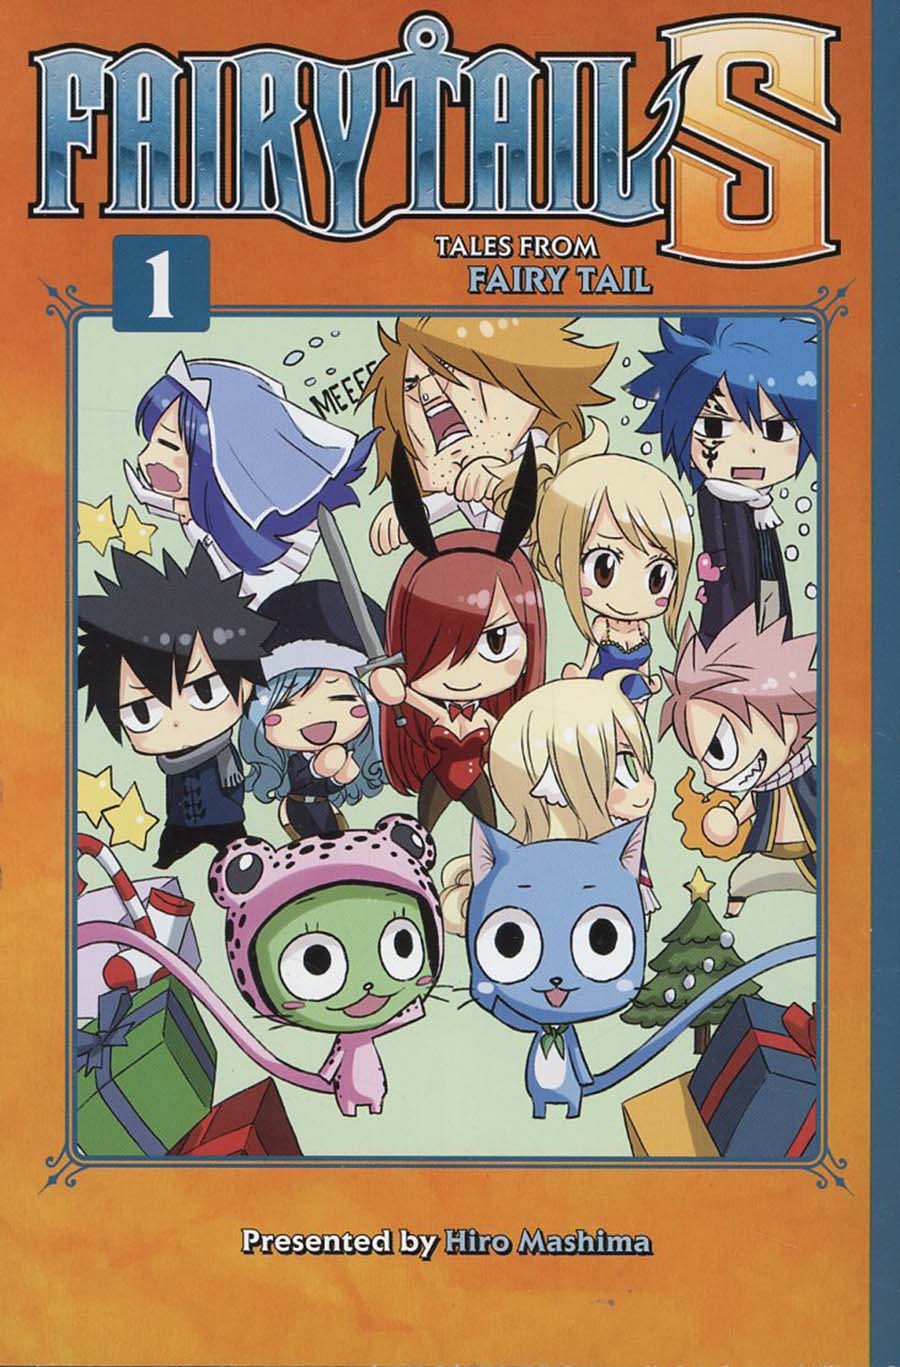 Fairy Tail S Tales From Fairy Tail Vol 1 GN